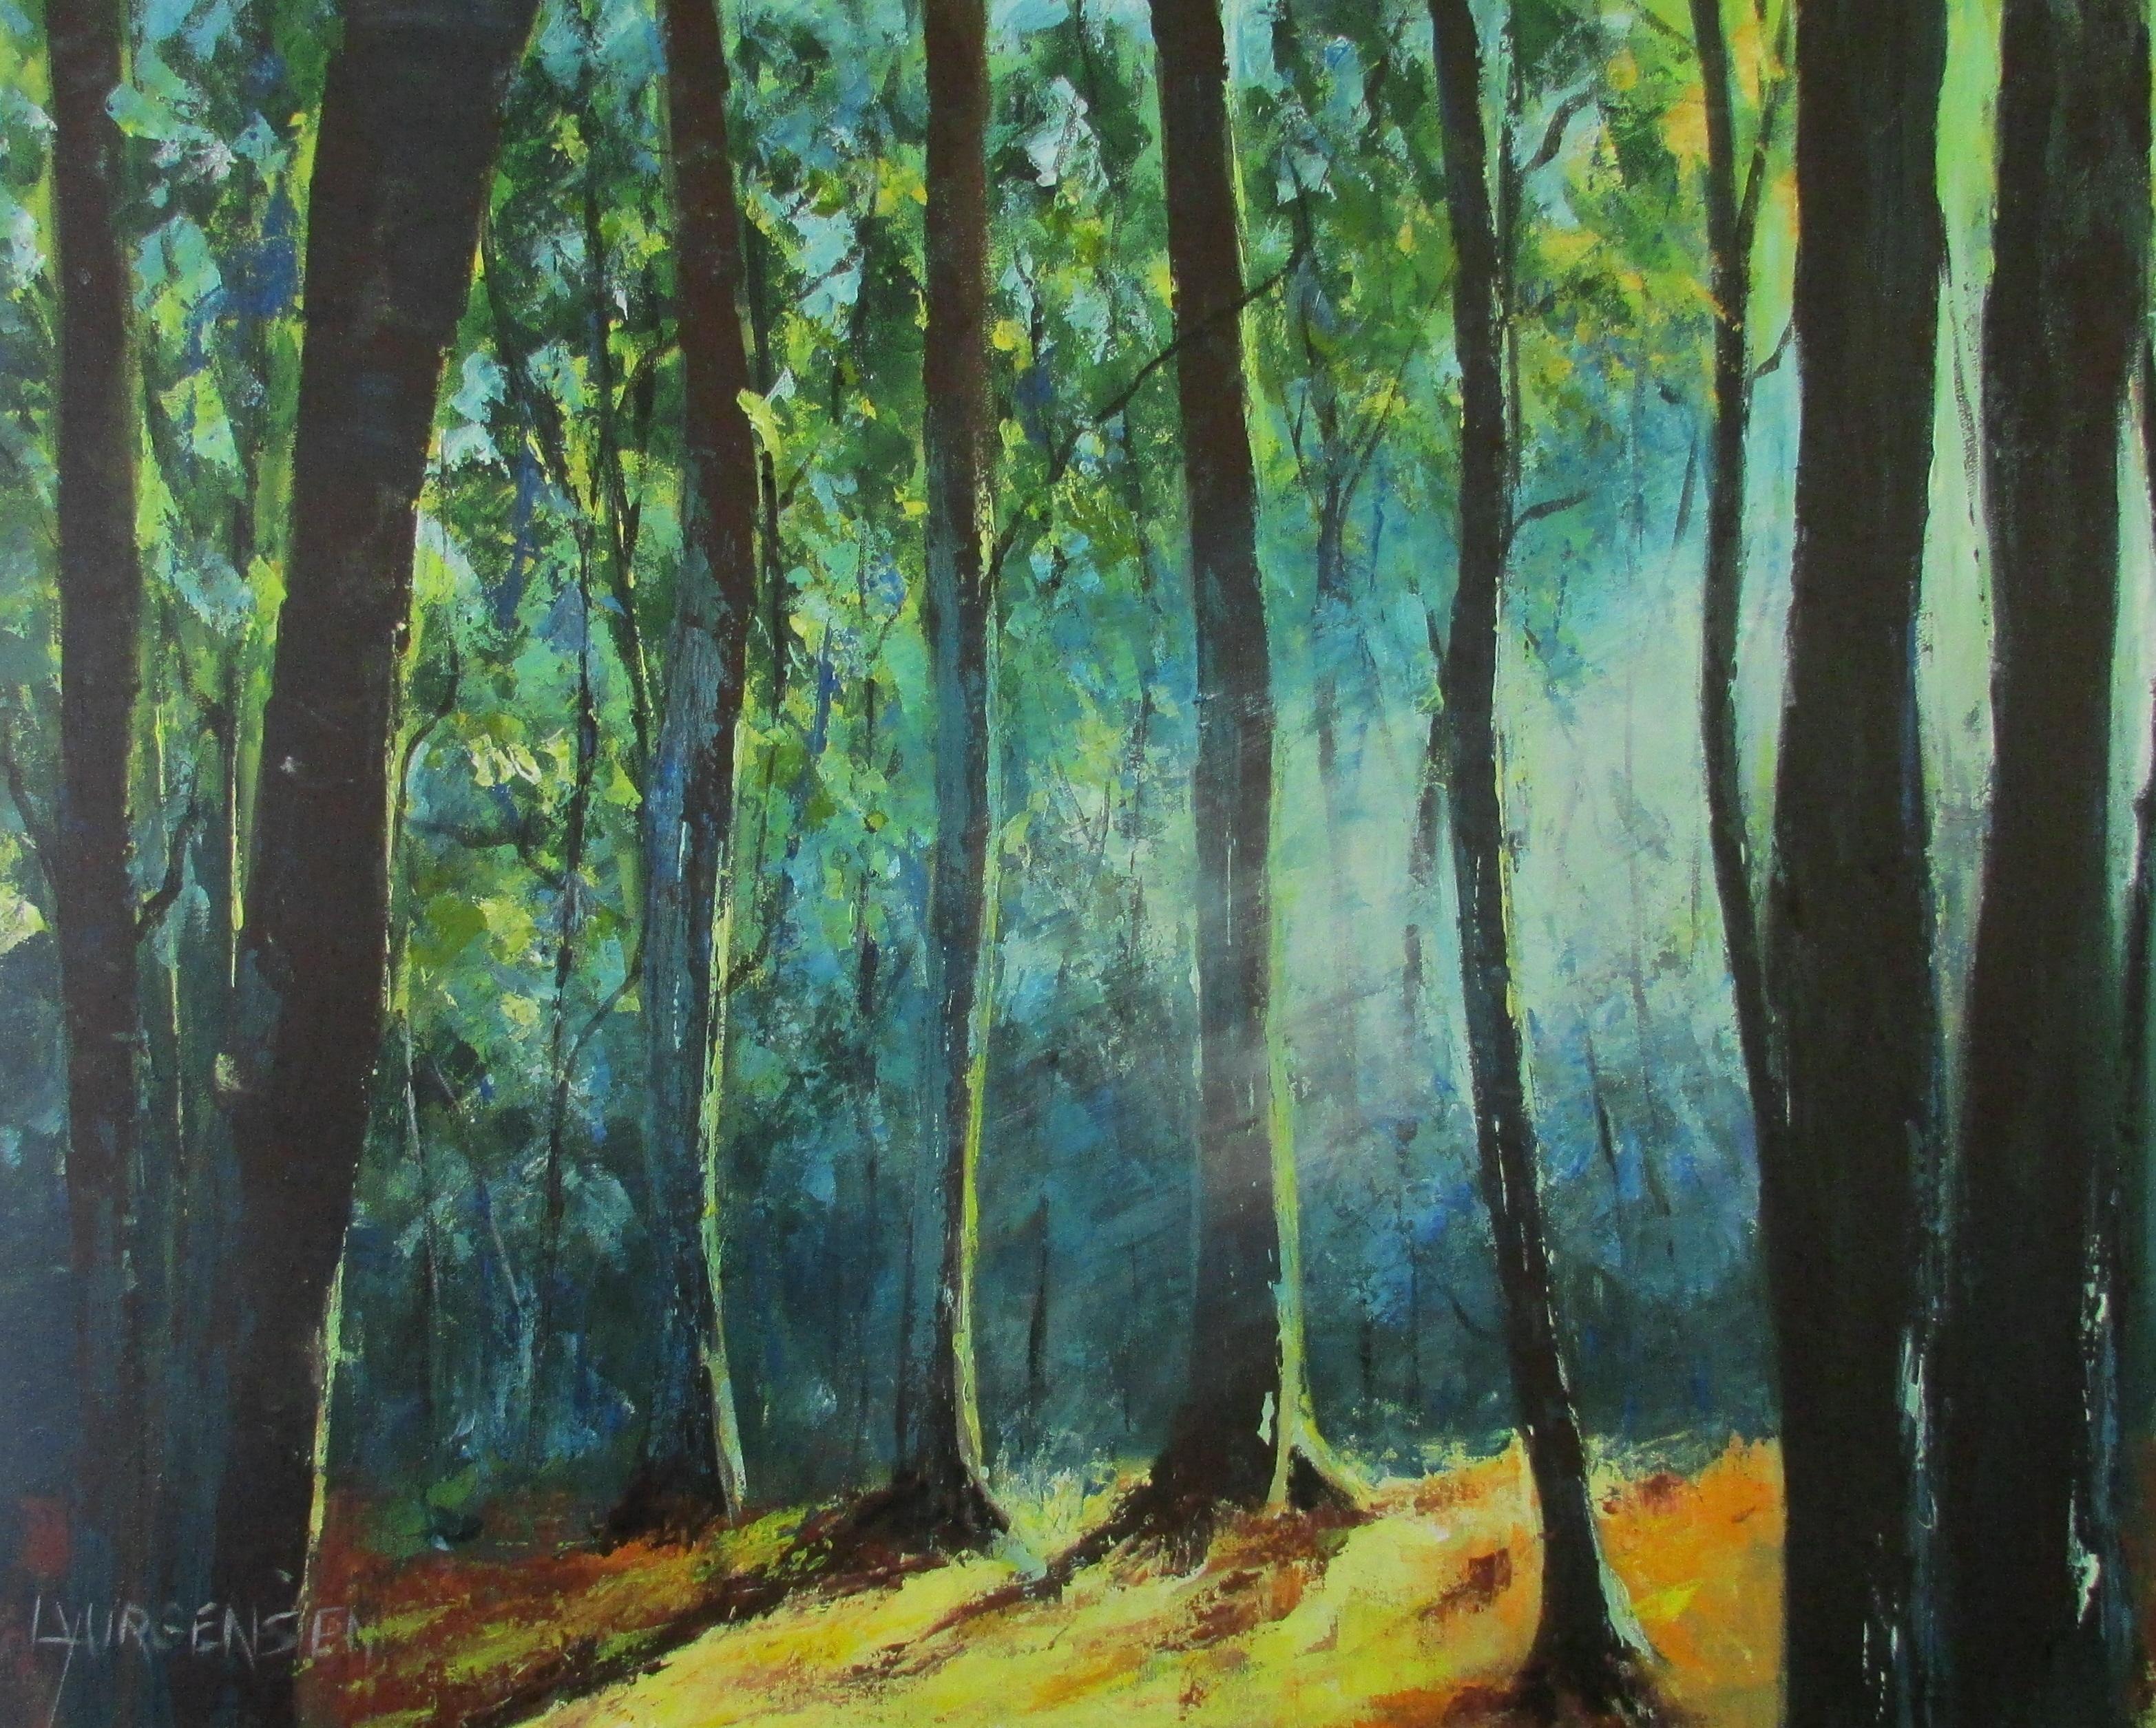 This indeed was a walk to remember with the light shining through the forest making everything appear soft and unfocused.  The colors in this painting are lovely and there is a fair amount of texture which was achieved with the use of a palette